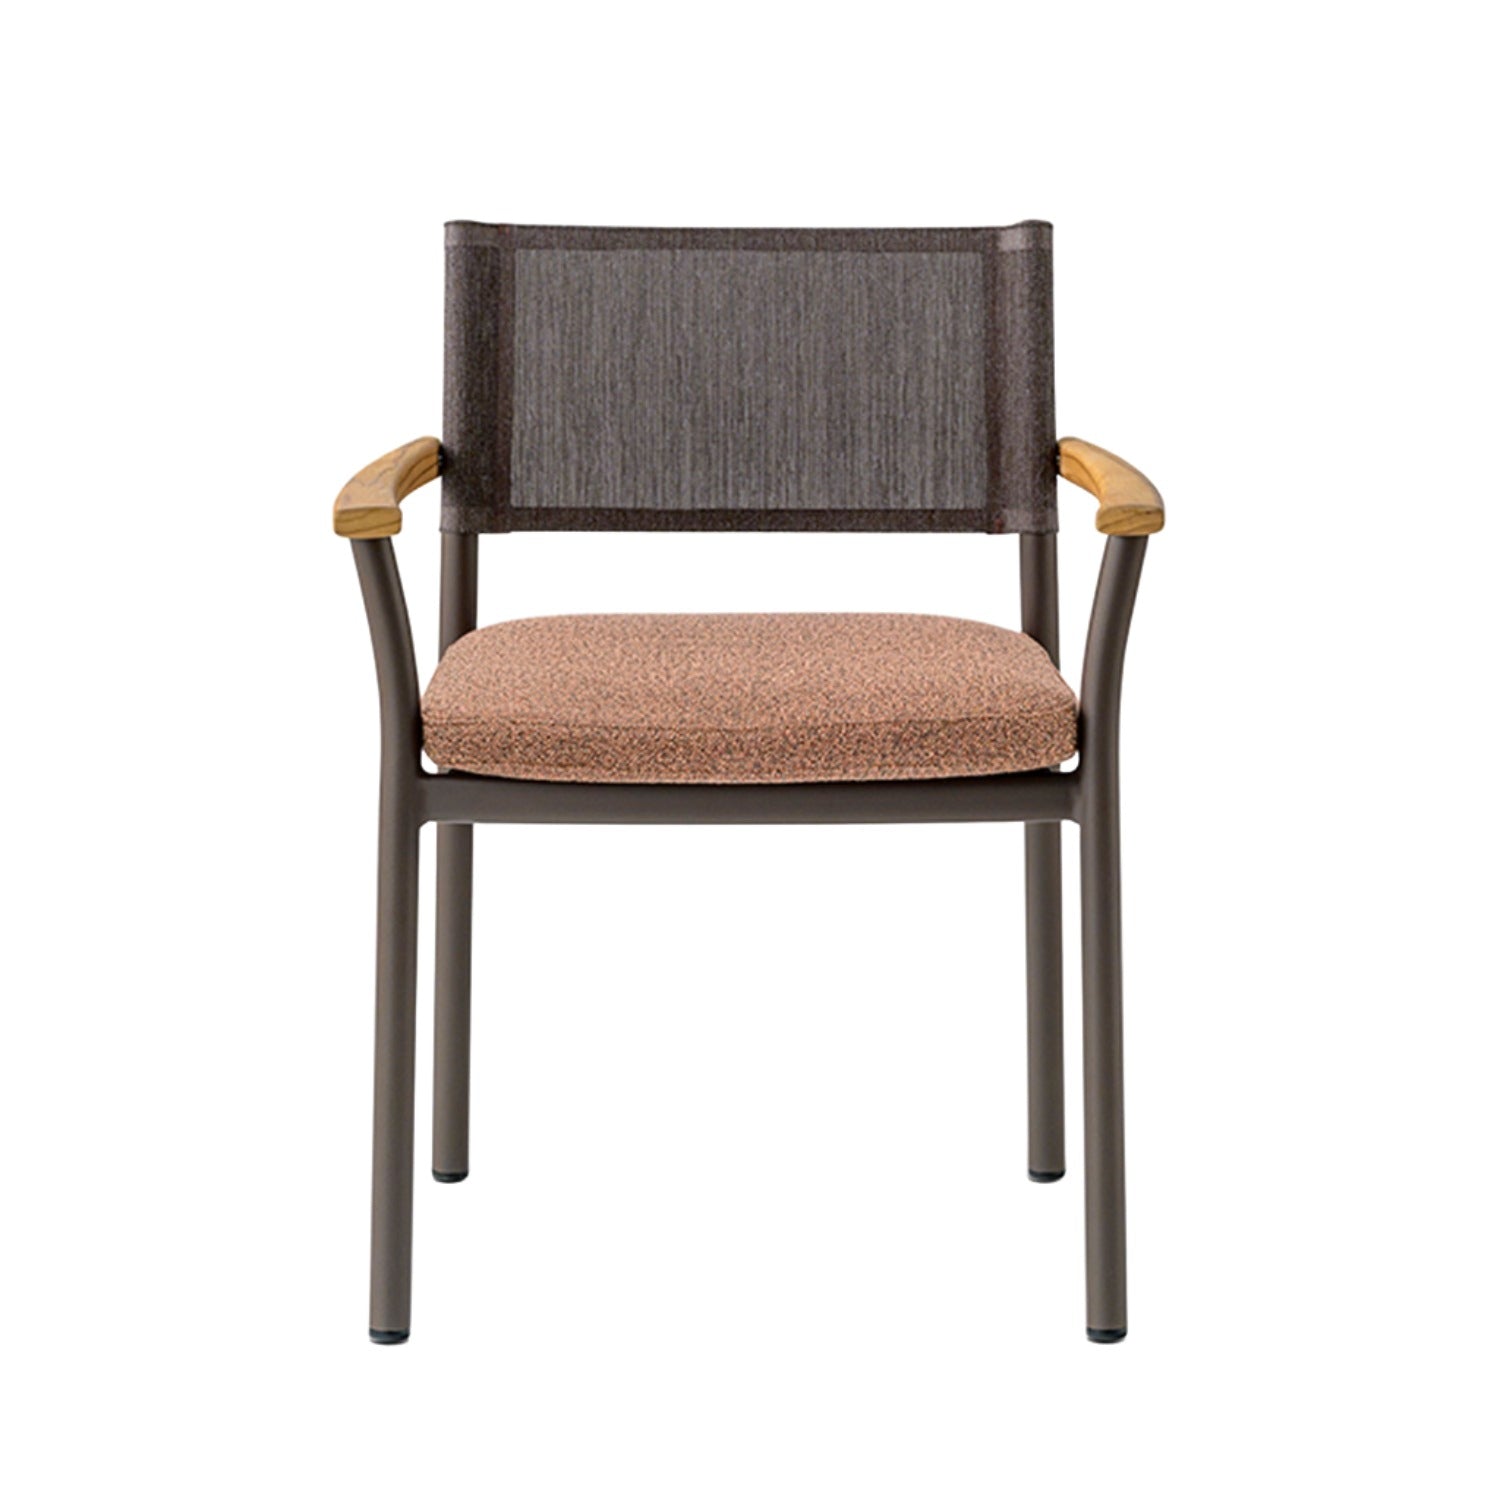 Pedrali 3695 outdoor dining chair in brown frame and brown upholstery